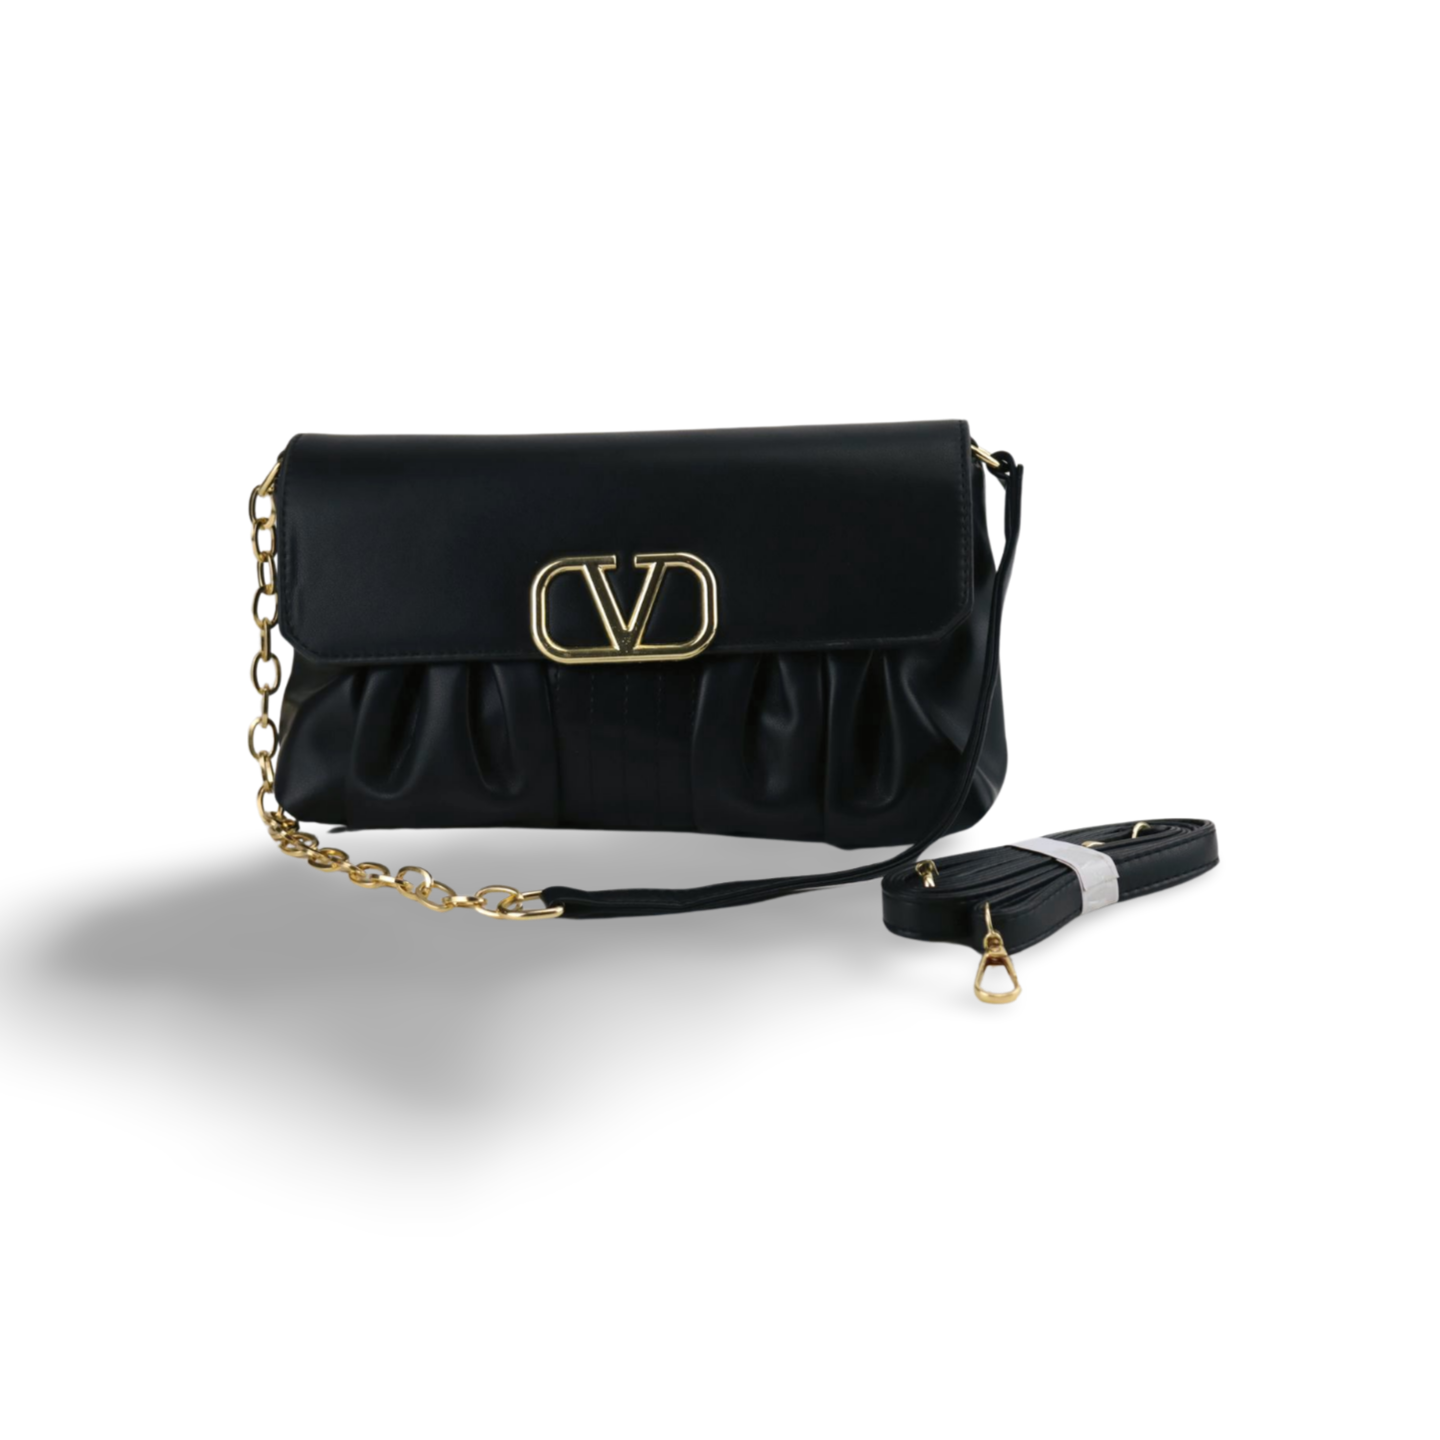 Stylish and Versatile Crossbody Purse with V Logo And Detachable Gold Chain